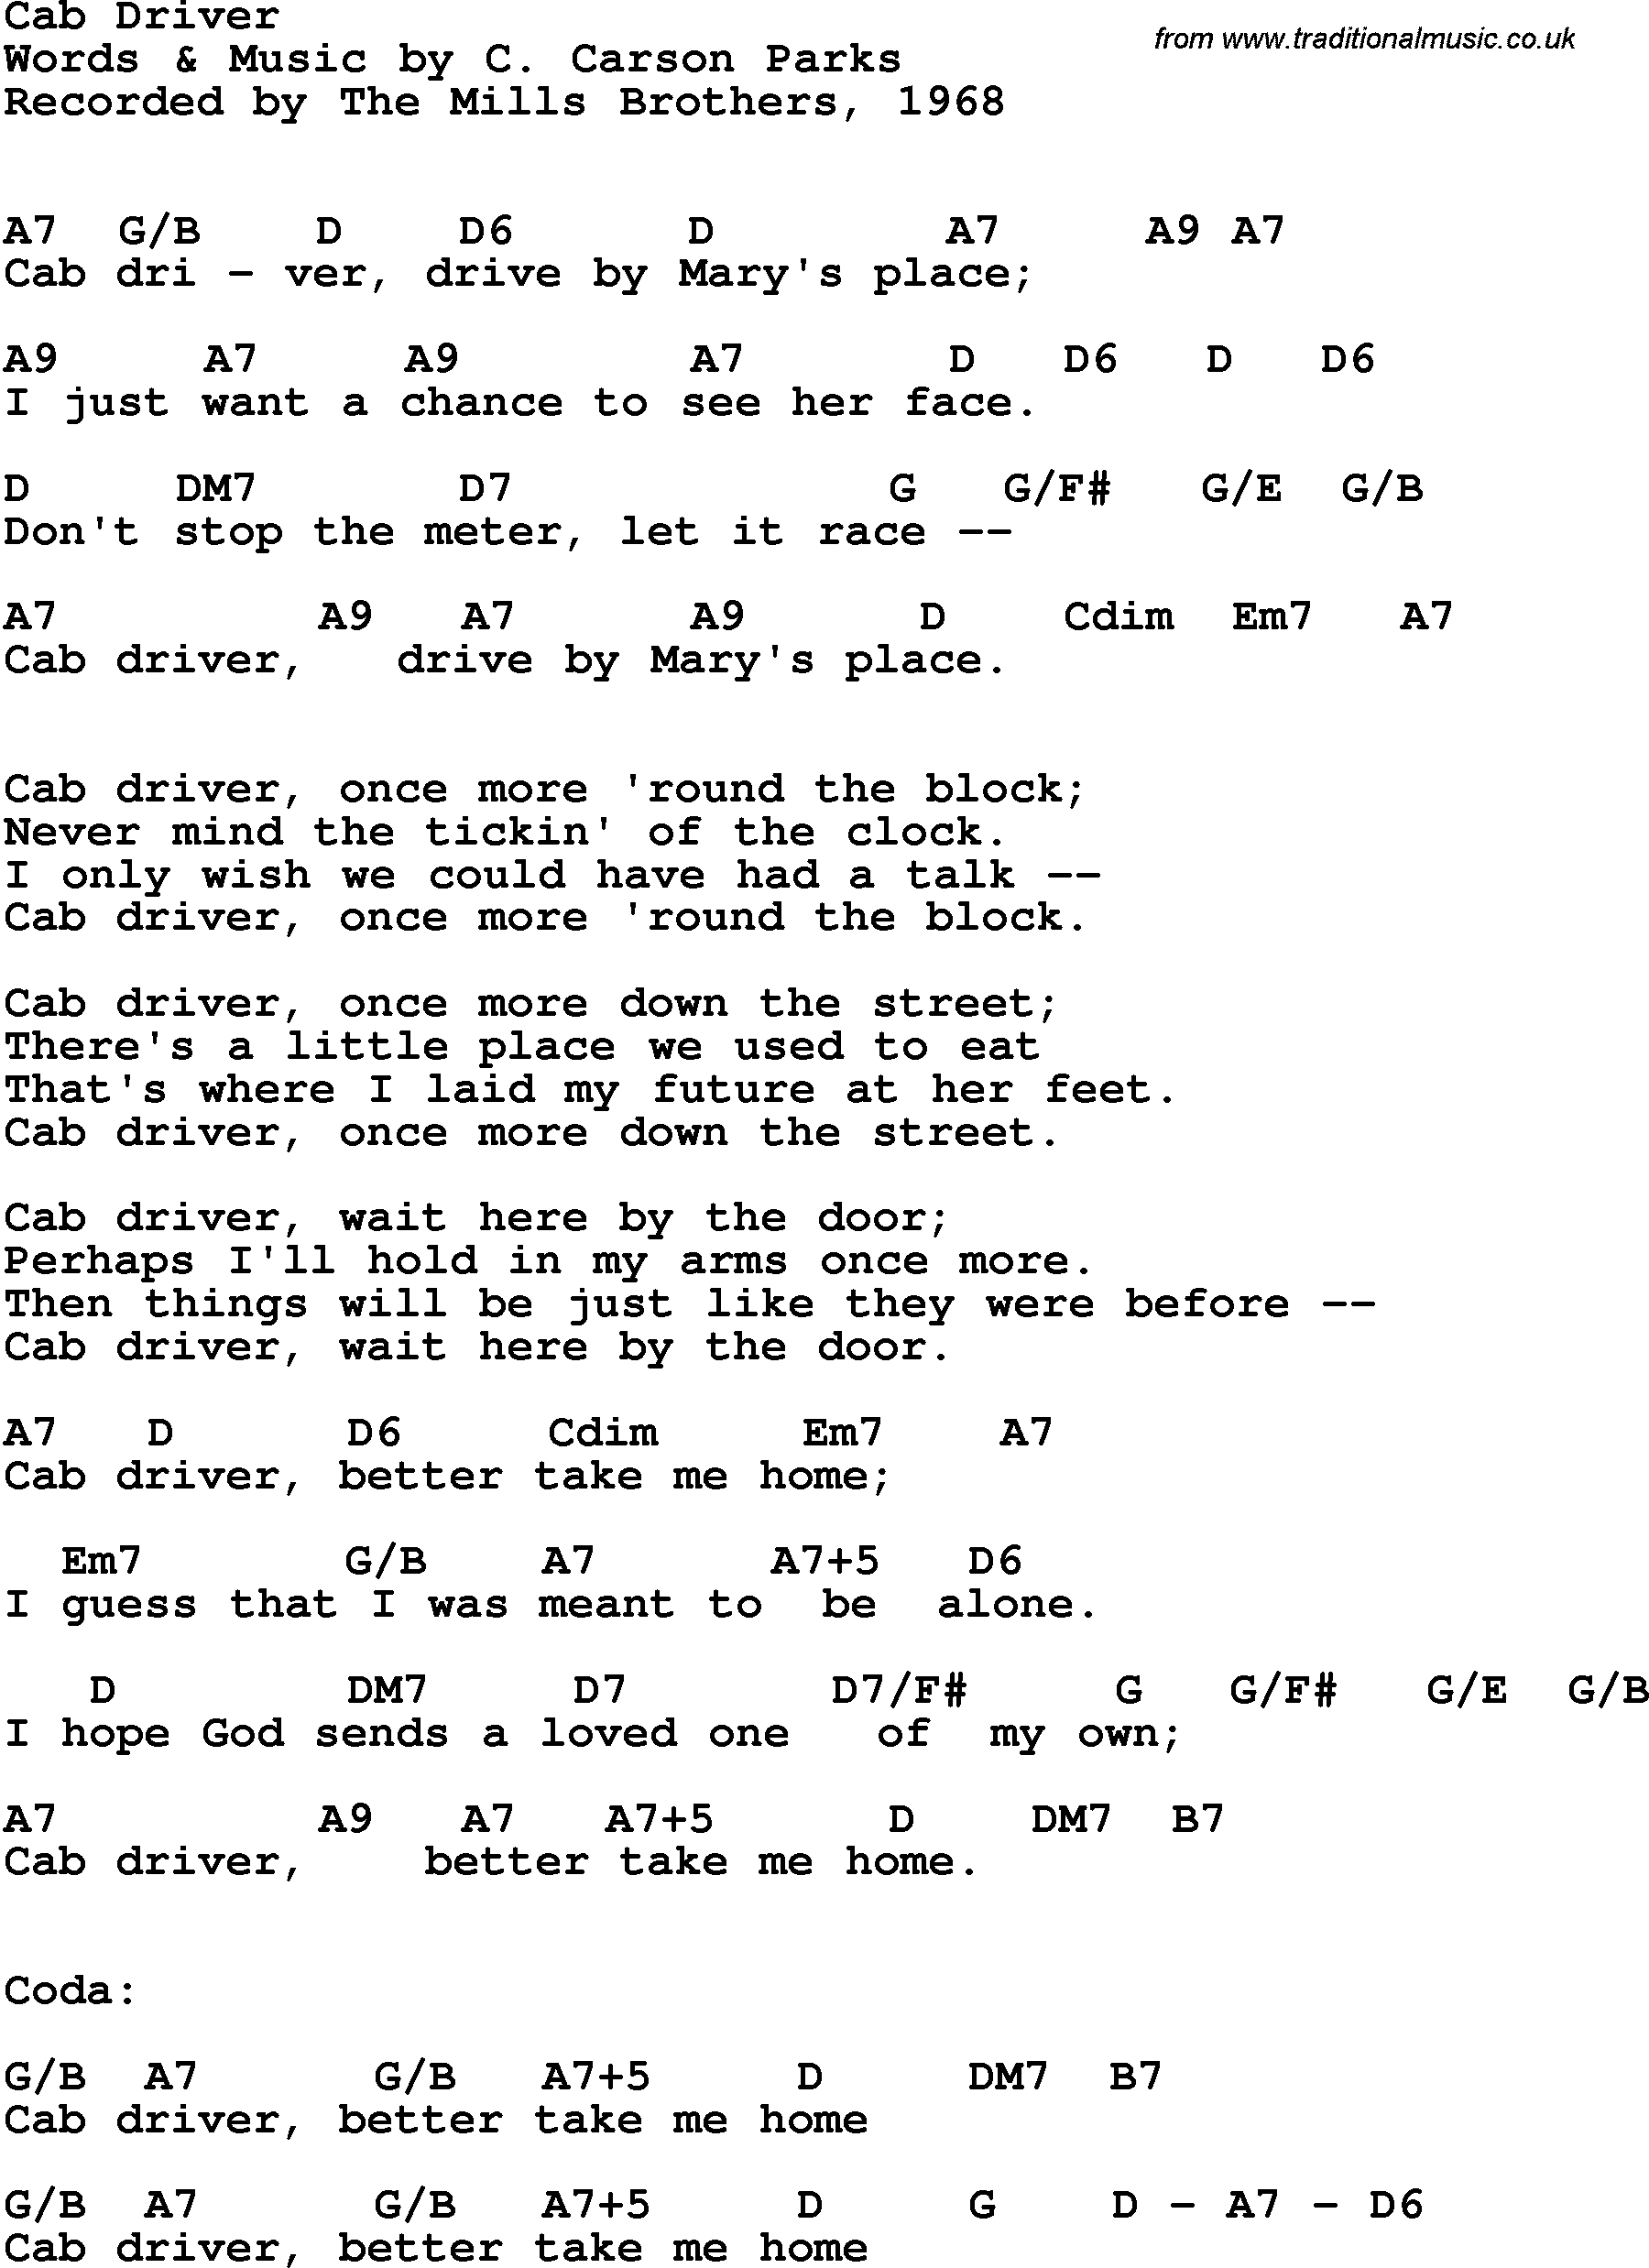 Song Lyrics with guitar chords for Cab Driver - The Mills Brothers, 1968